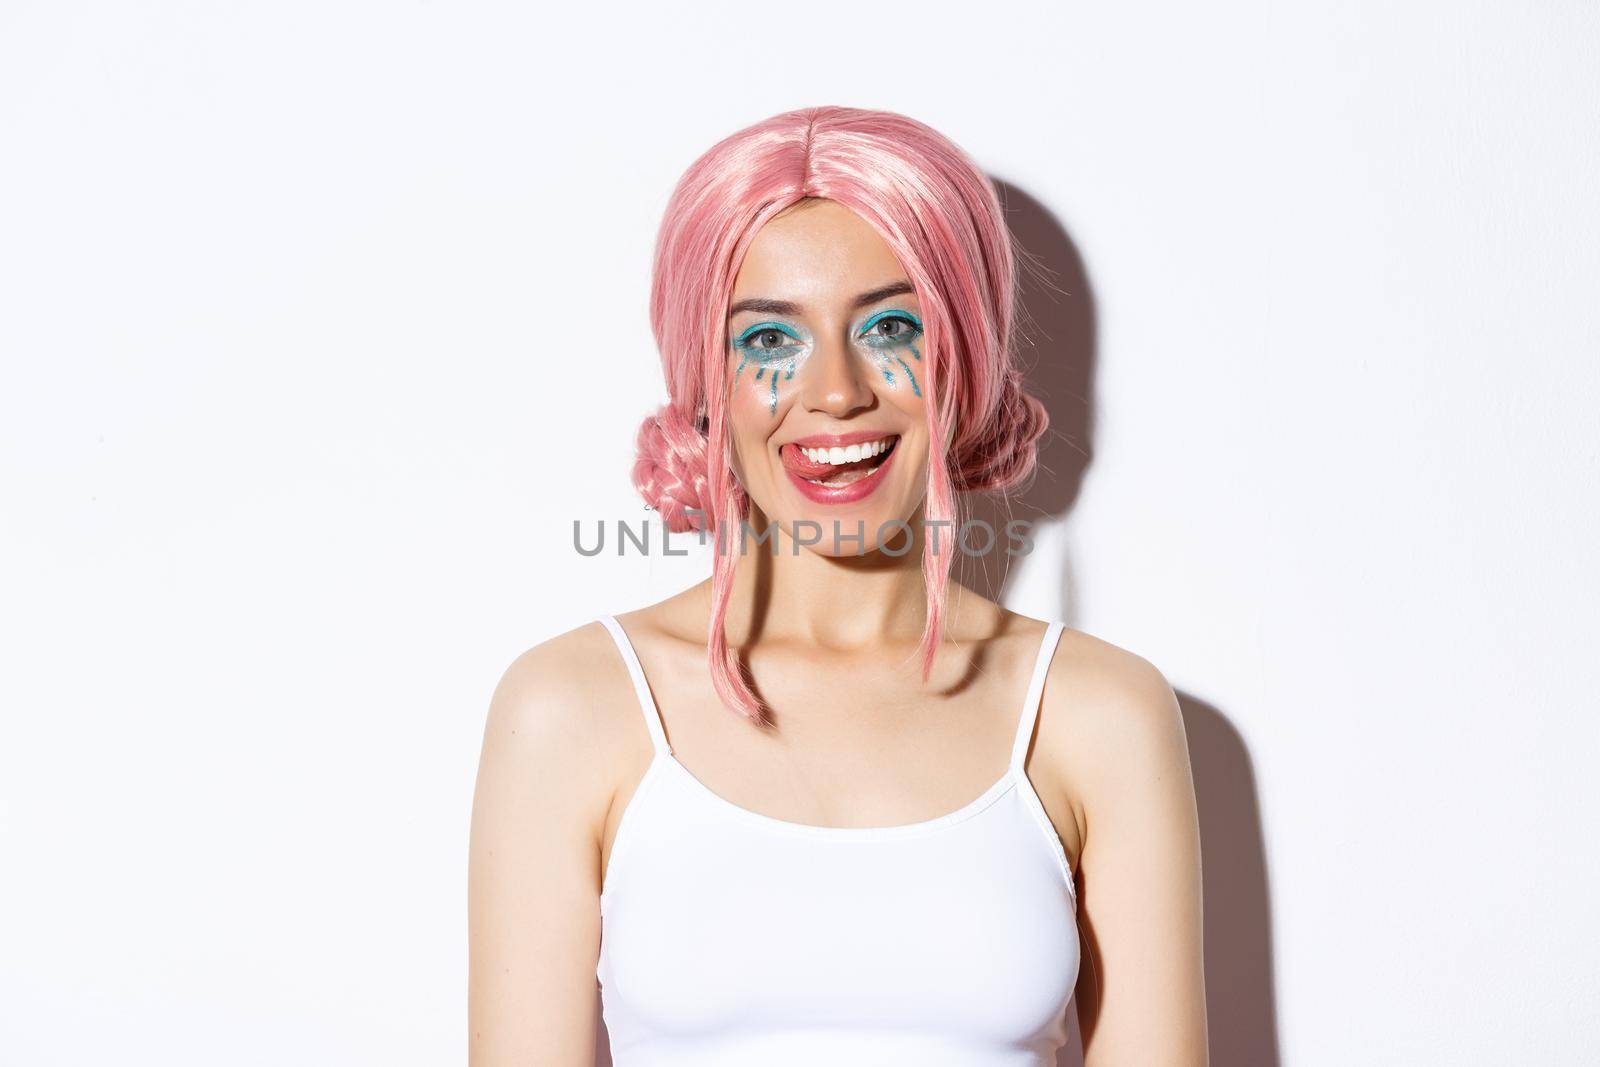 Close-up of happy beautiful female model in pink wig, showing tongue and smiling, celebrating holiday in fairy costume, standing over white background.